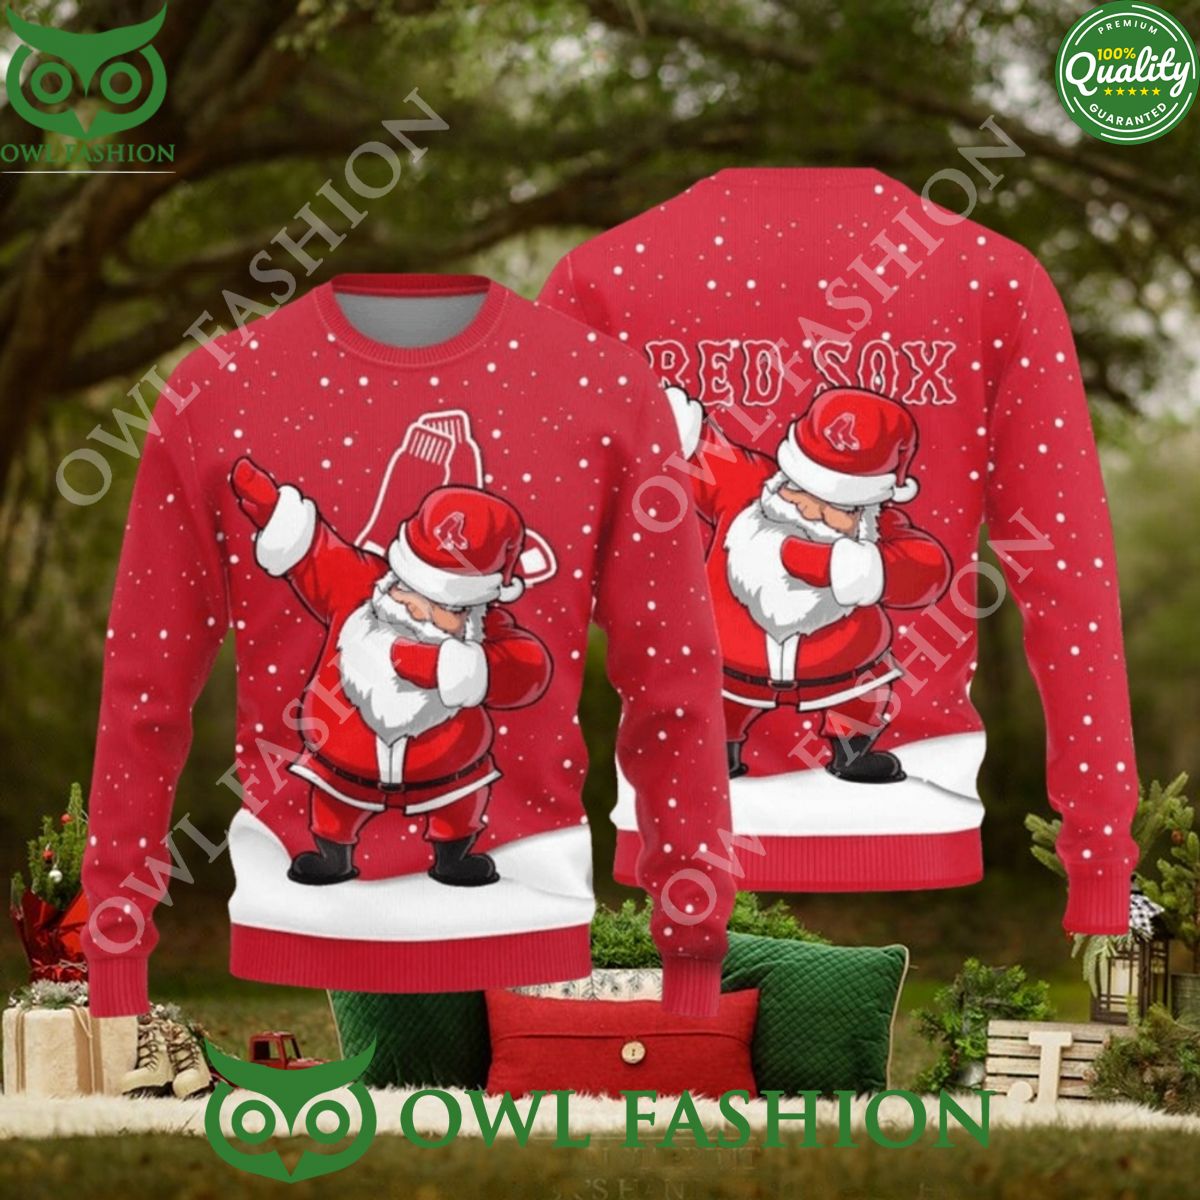 Boston Red Sox Dab Santa New Style Sweater Jumper Wow! This is gracious